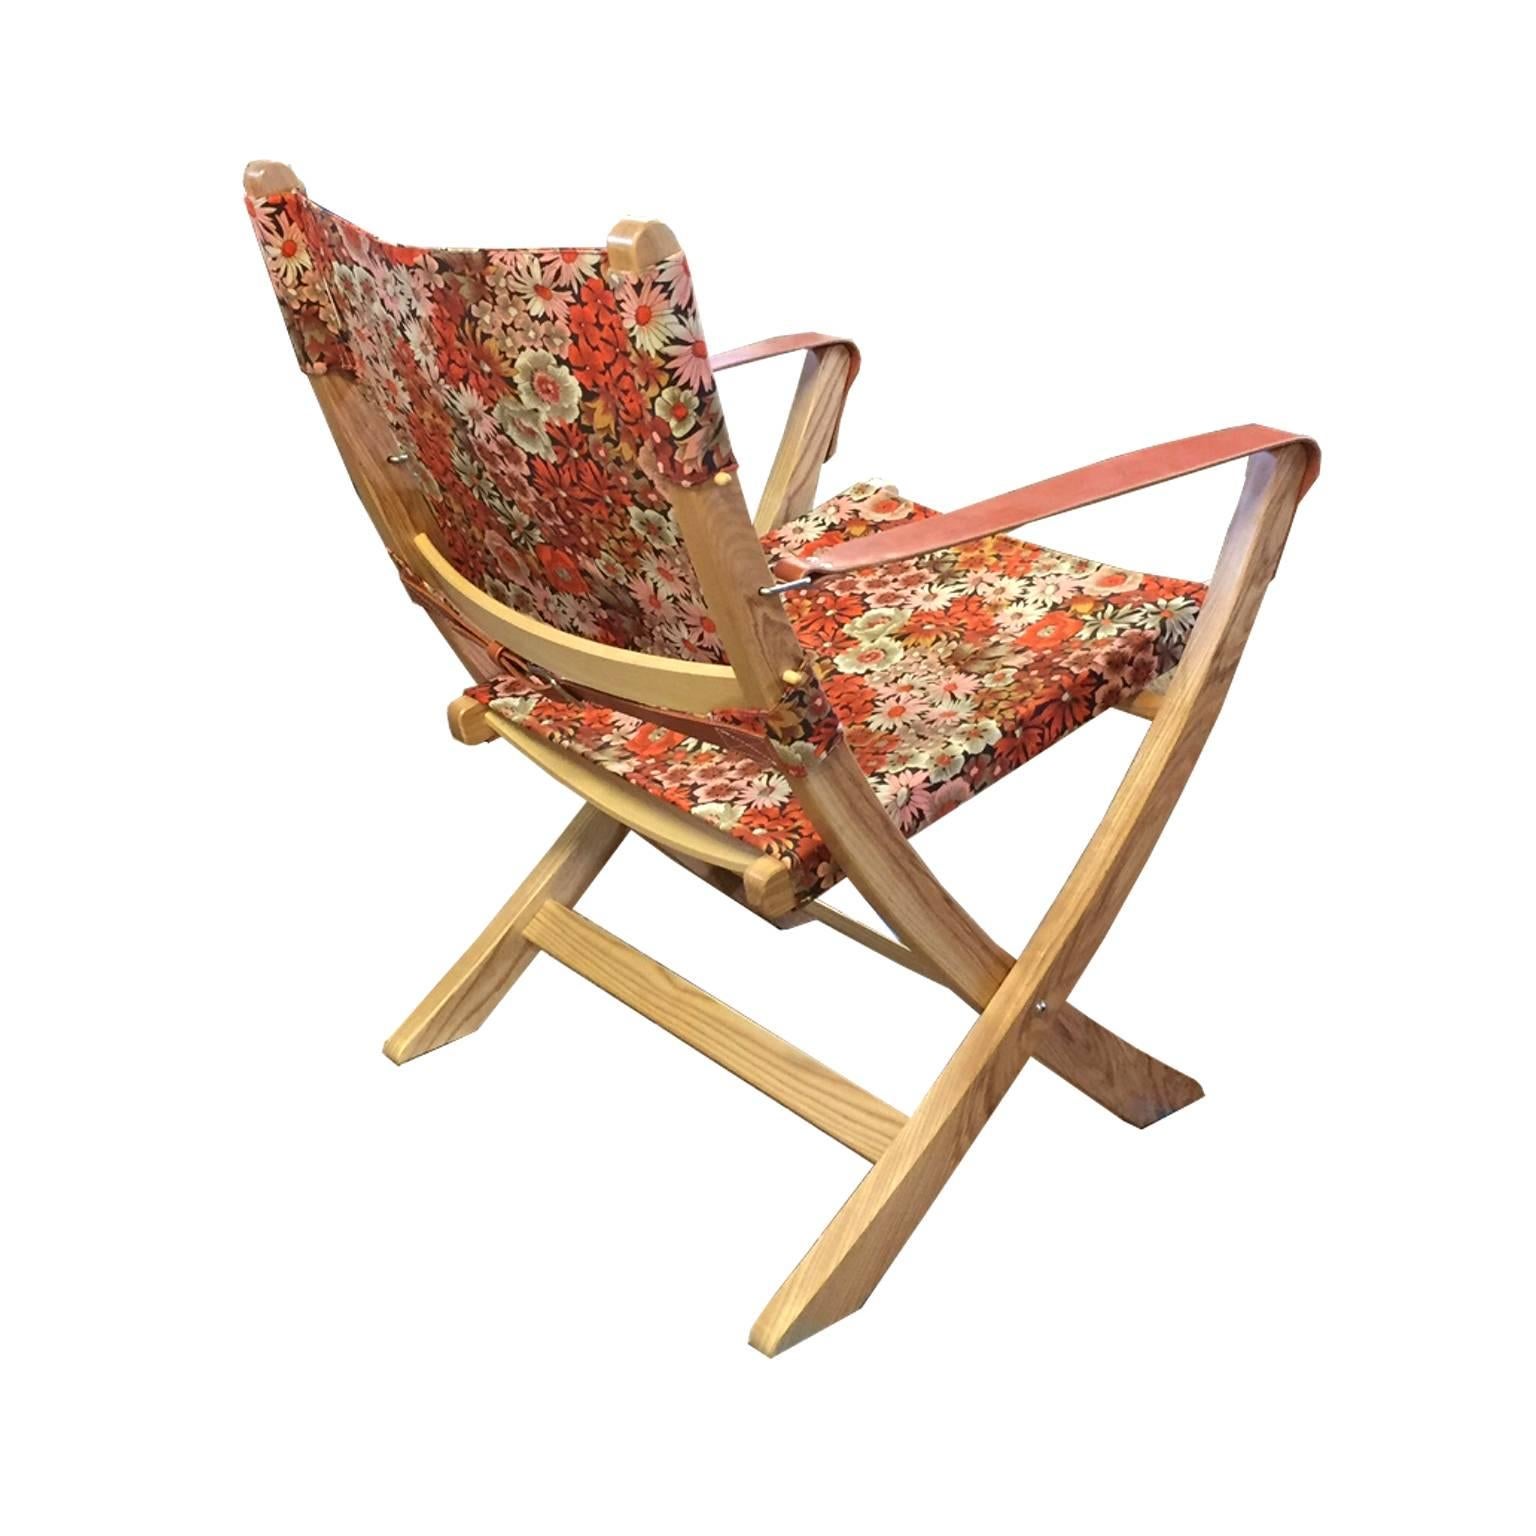 Sunbeam Jackie's iconic 'Champagne chair' design is inspired by the Campaign furniture tradition, beautifully made folding furniture for military camps. We have added a dash of Sunbeam Jackie exuberance and tweaked the name for that special